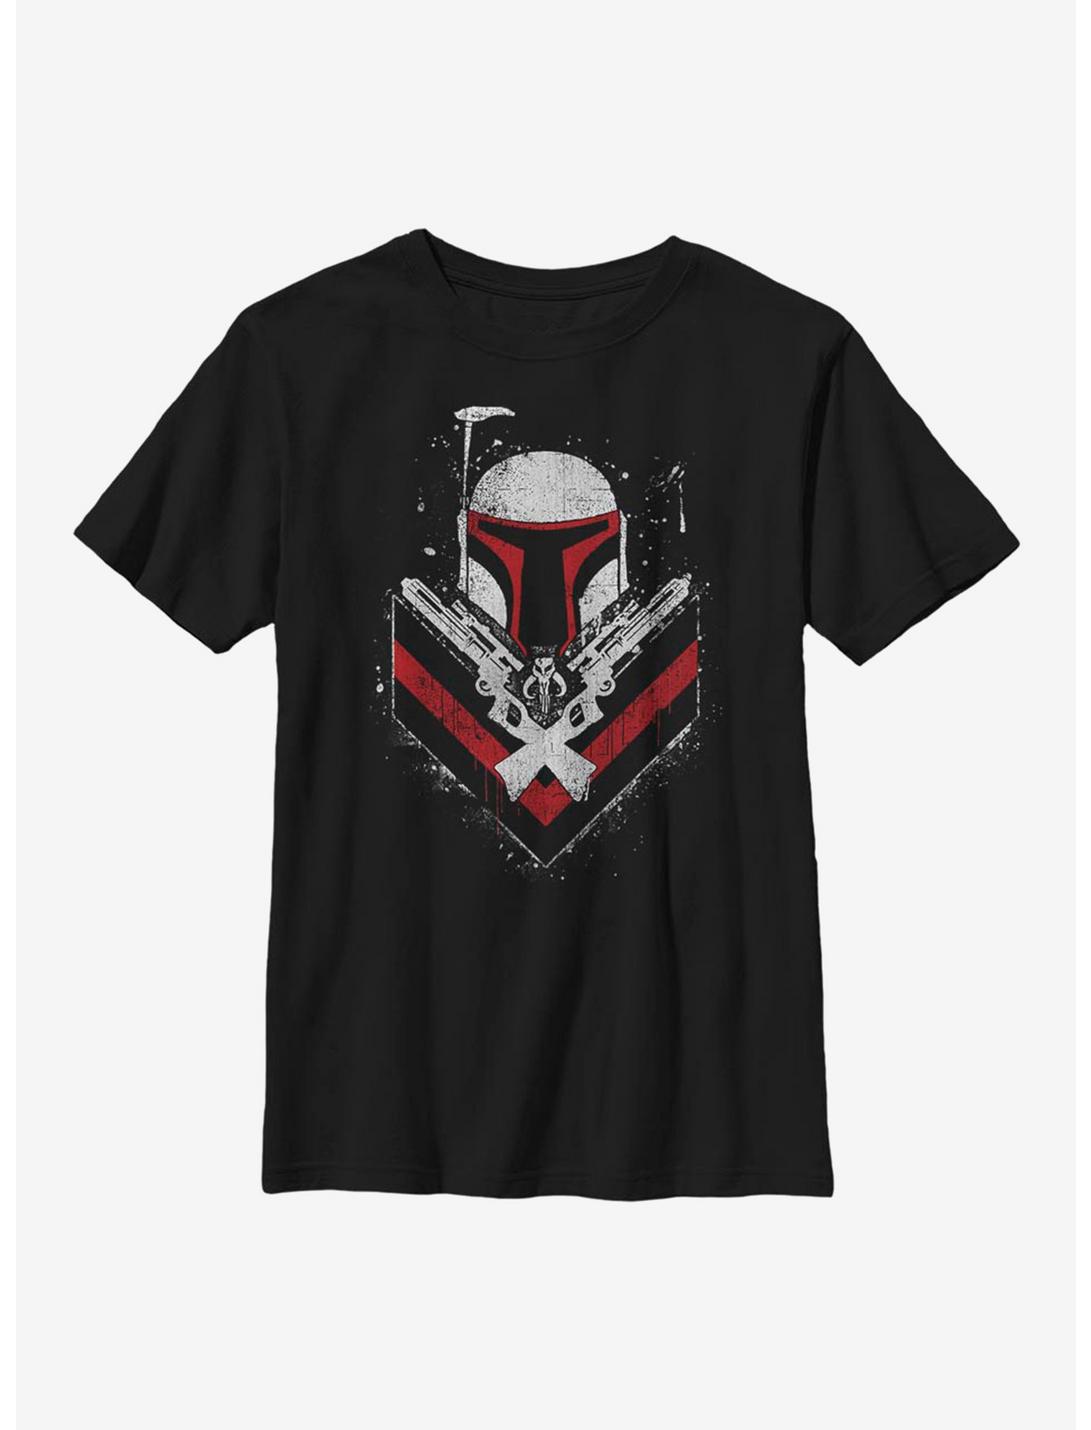 Star Wars Only Promises Youth T-Shirt, BLACK, hi-res